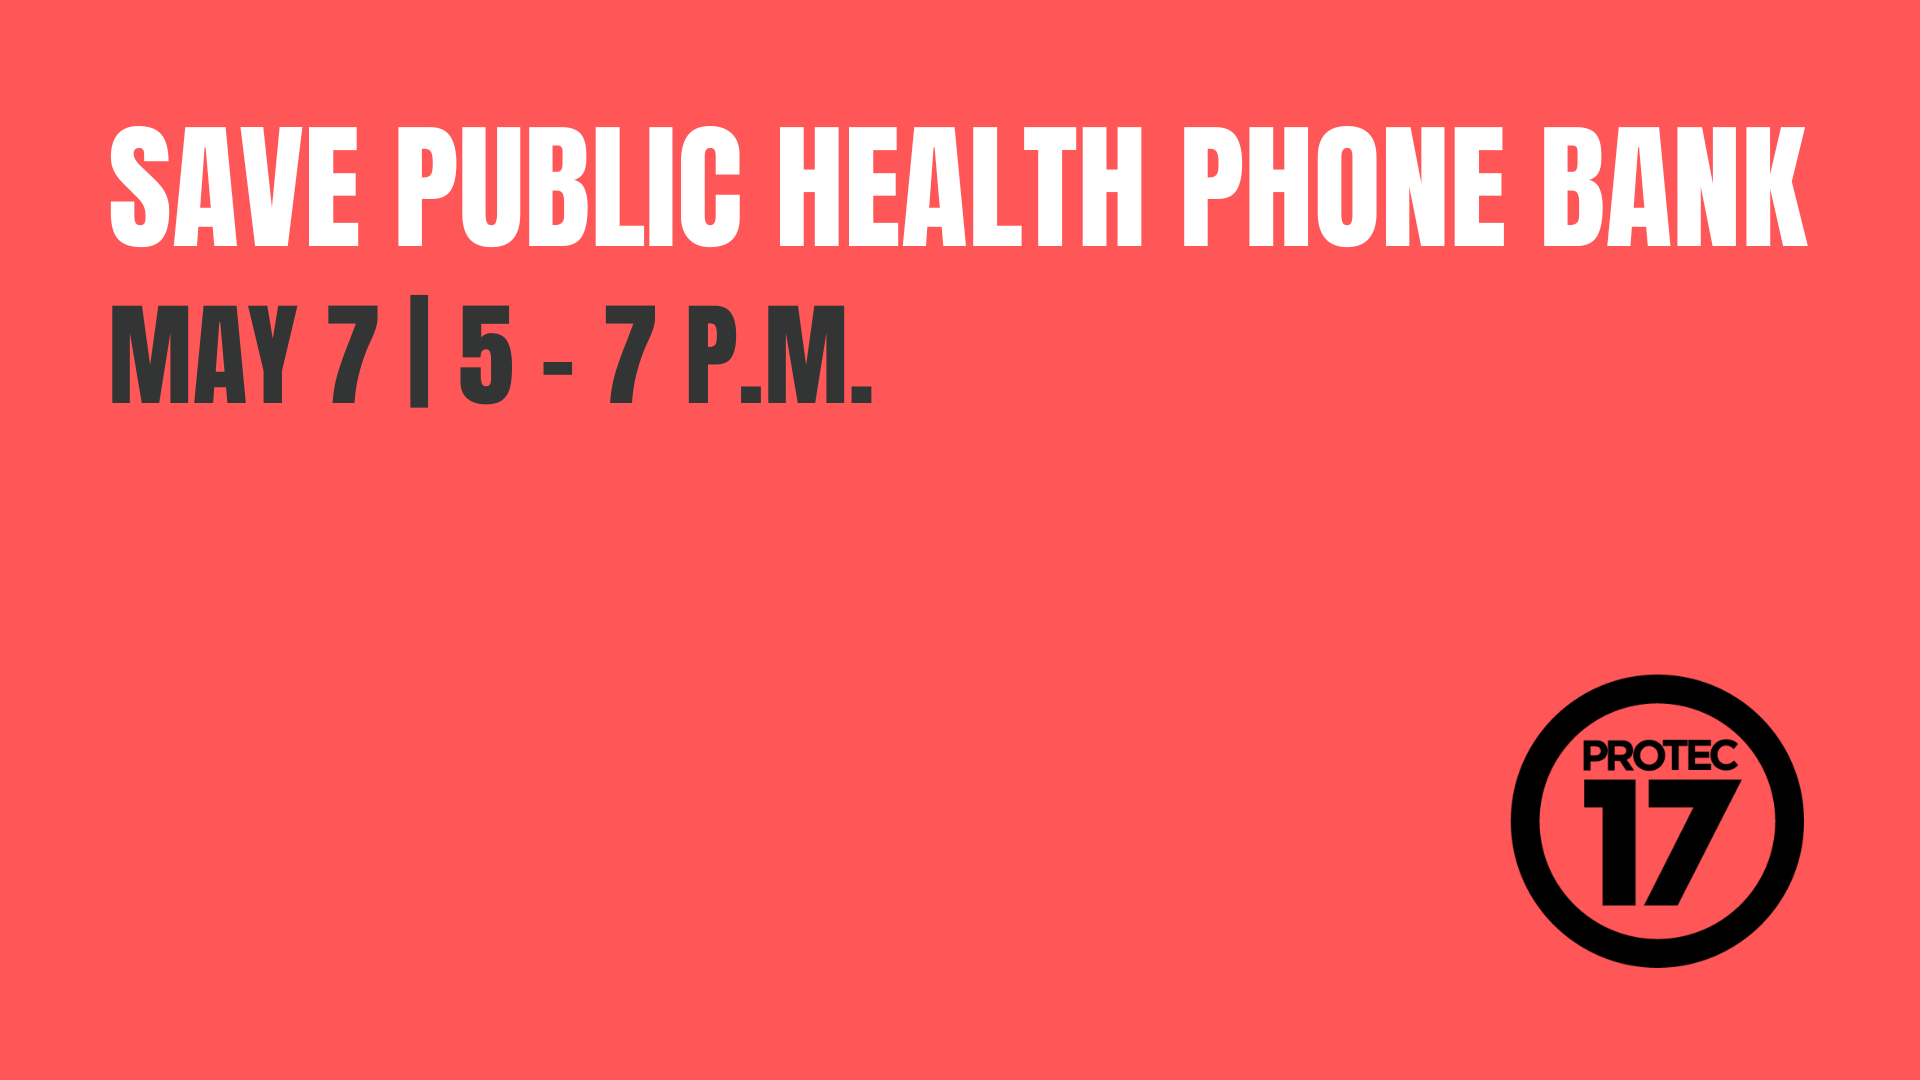 On a coral background the text reads, "SAVE PUBLIC HEALTH PHONE BANK | MAY 7 | 5 - 7 P.M." The PROTEC17 logo is in the bottom right.